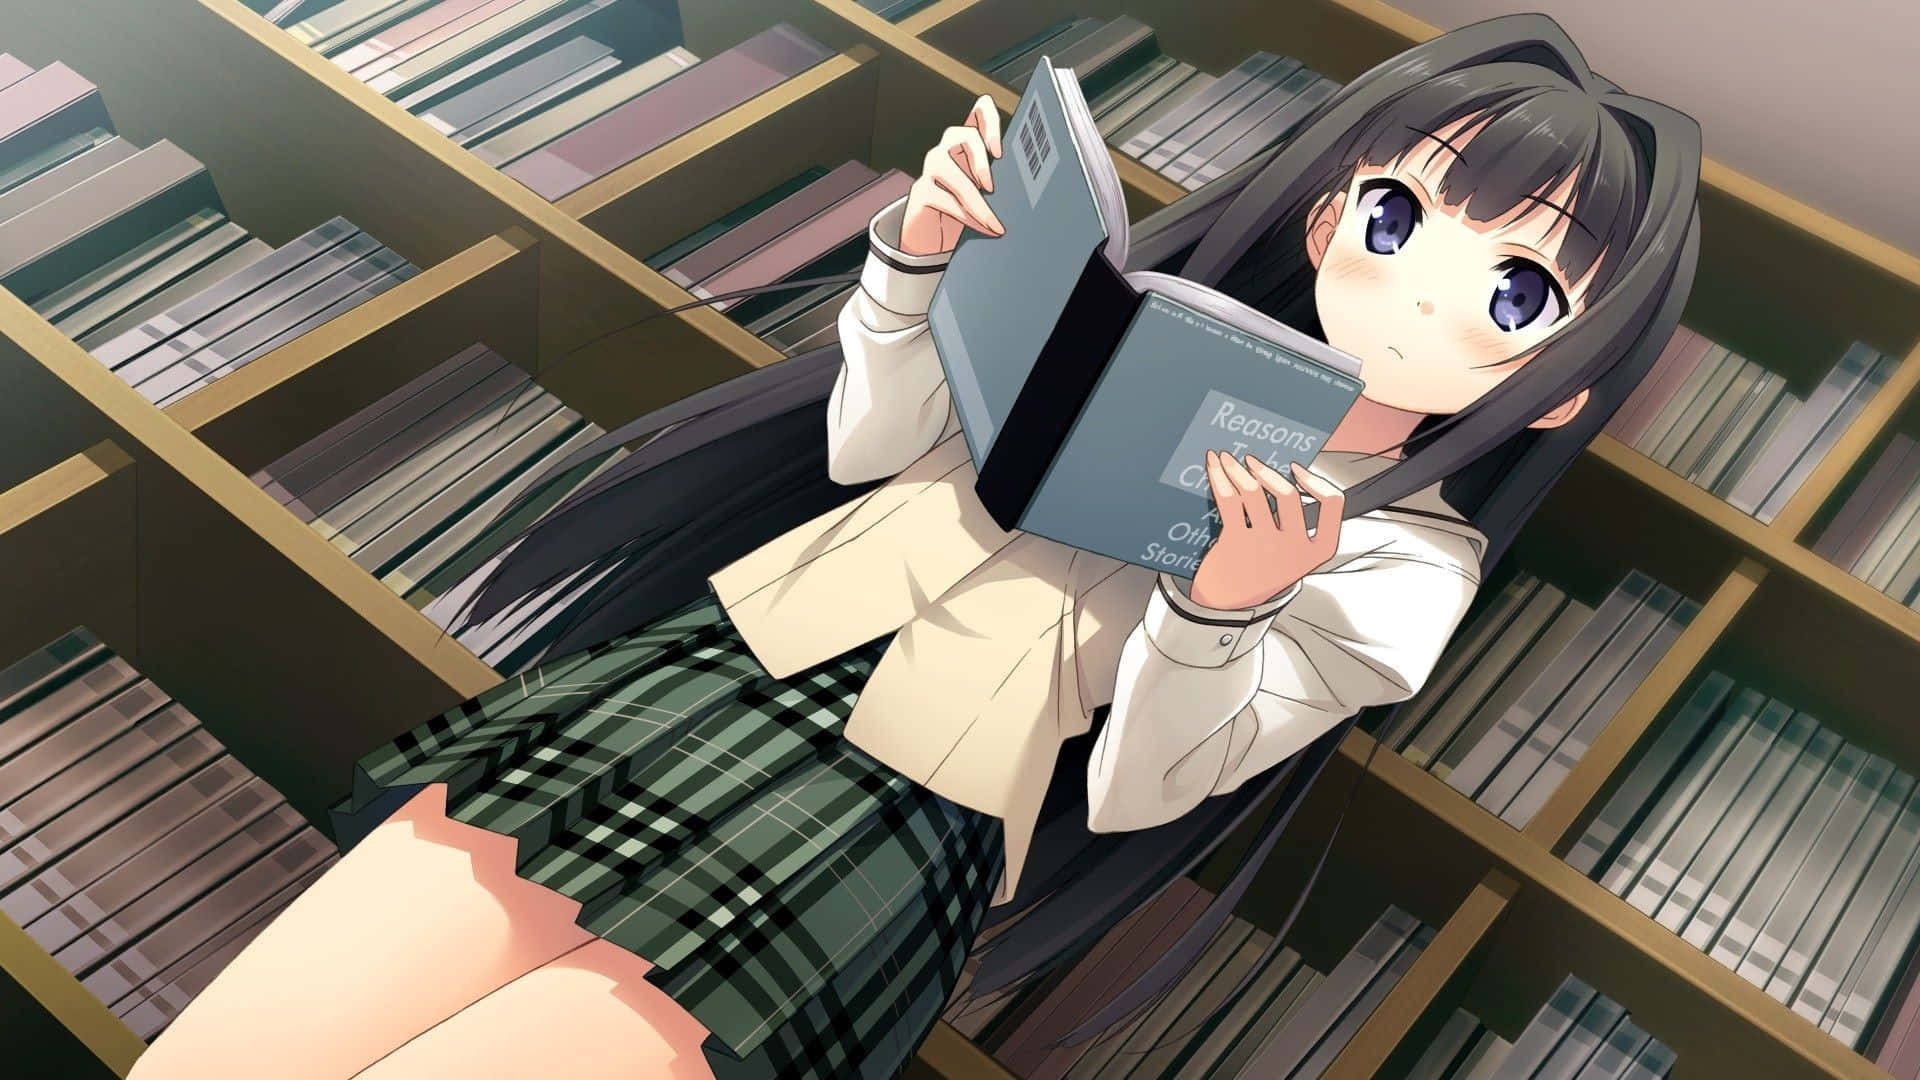 A Girl In A Skirt Reading A Book In A Library